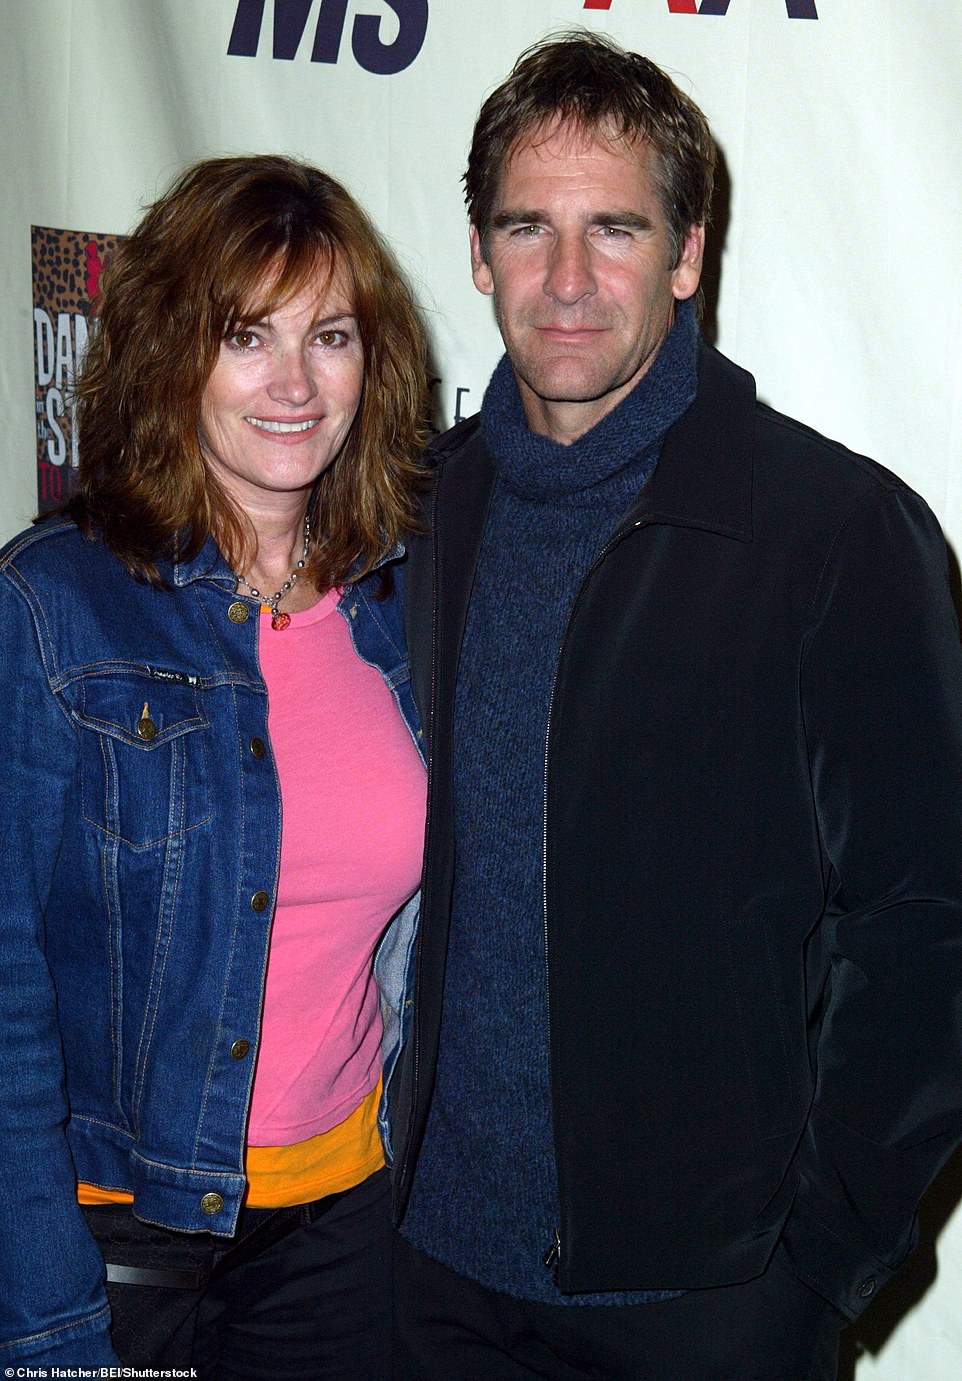 The couple seen arm in arm at the Race To Erase gala in Los Angeles in May 2003.